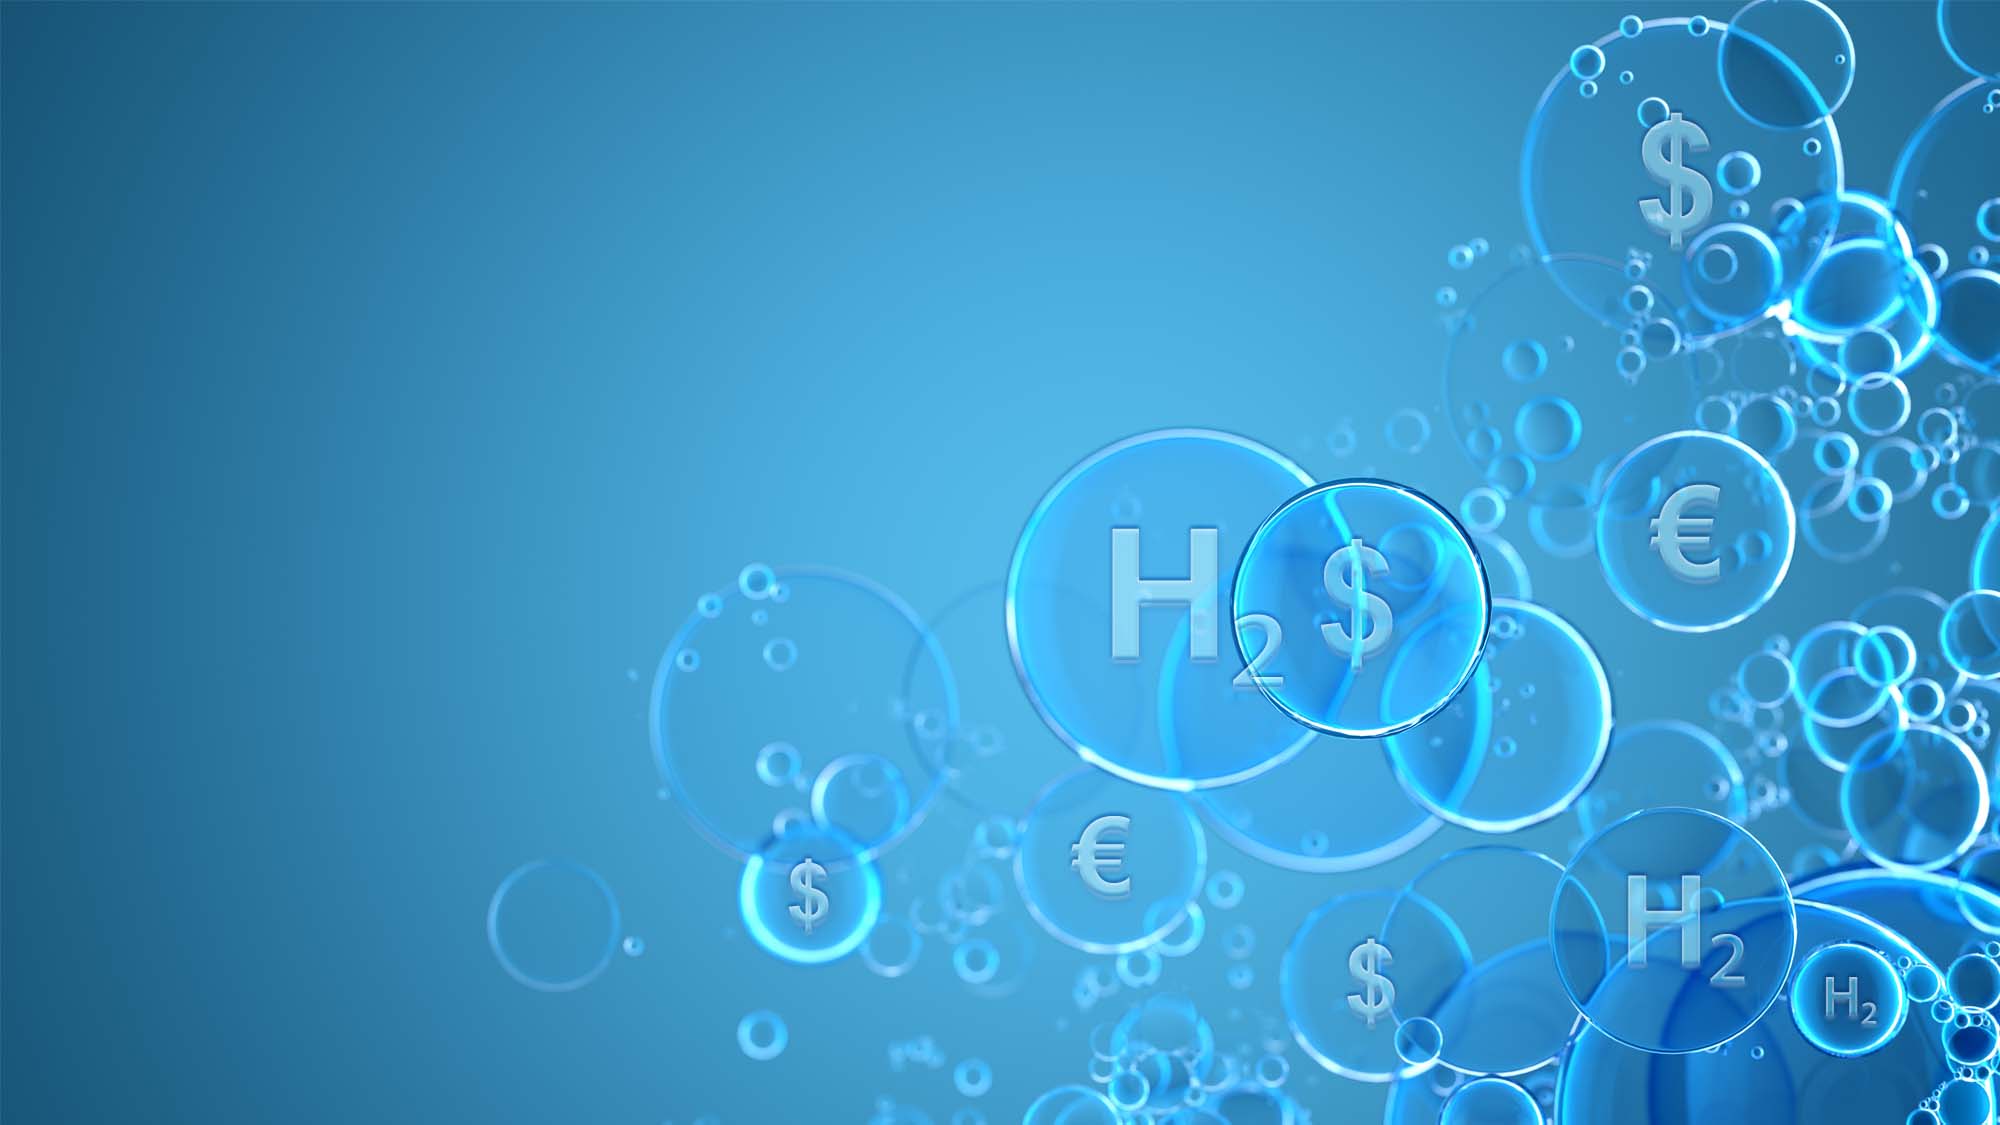 Abstract image with bubbles over a blue background